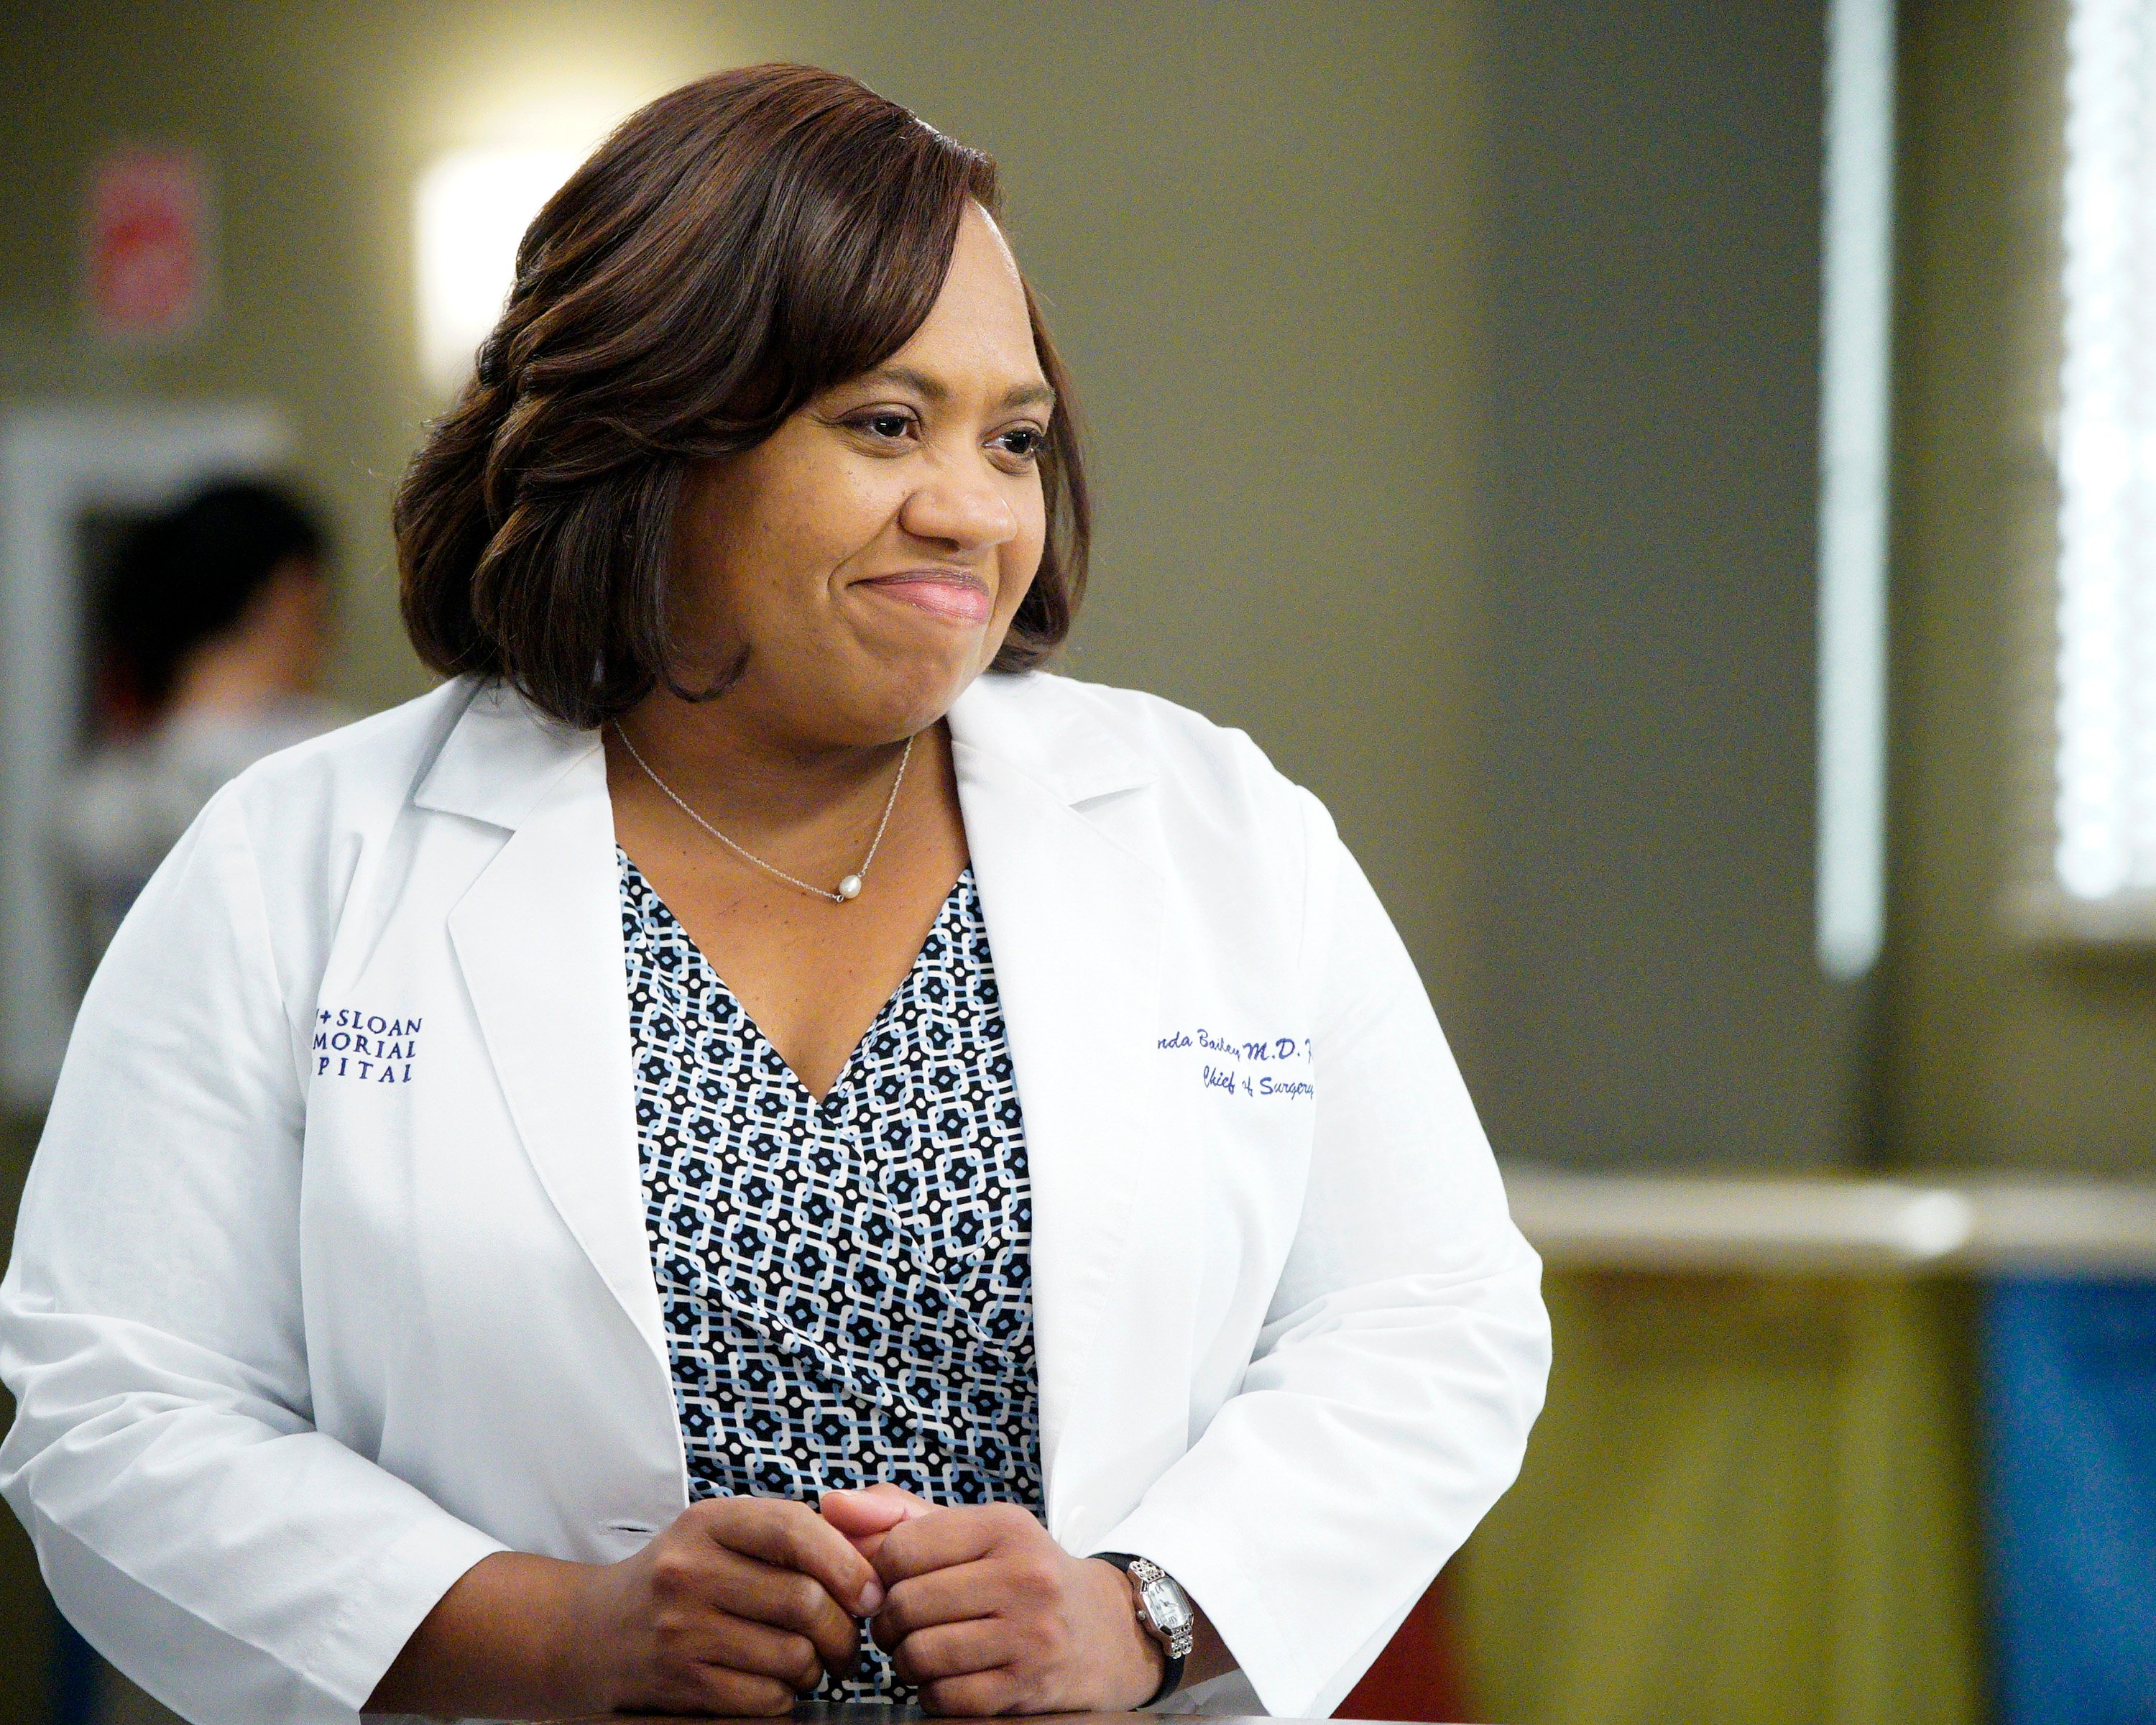 'Grey's Anatomy': Miranda Bailey actor Chandra Wilson wearing a lab coat and dress during a scene of the ABC show.